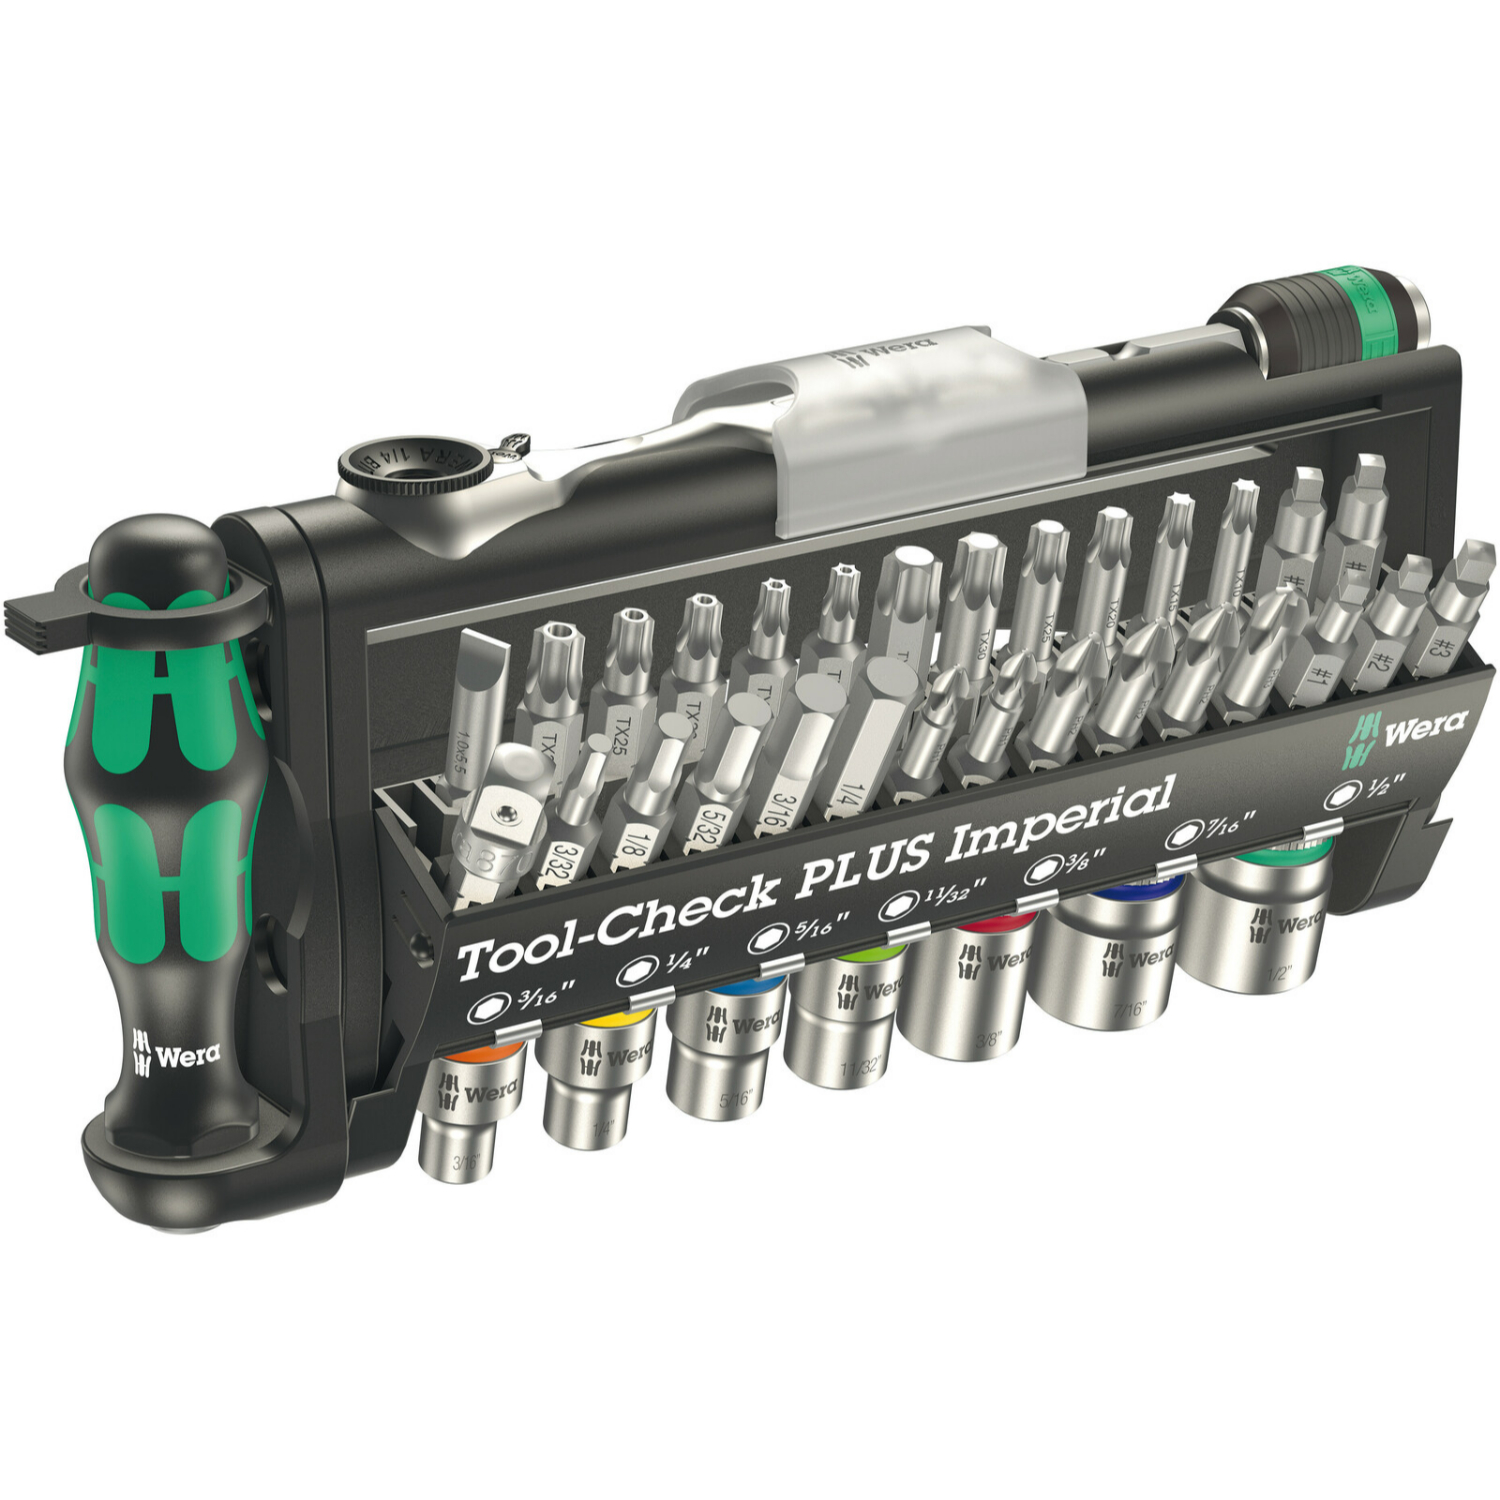 Wera Tool-Check PLUS Imperial, 39 pièces